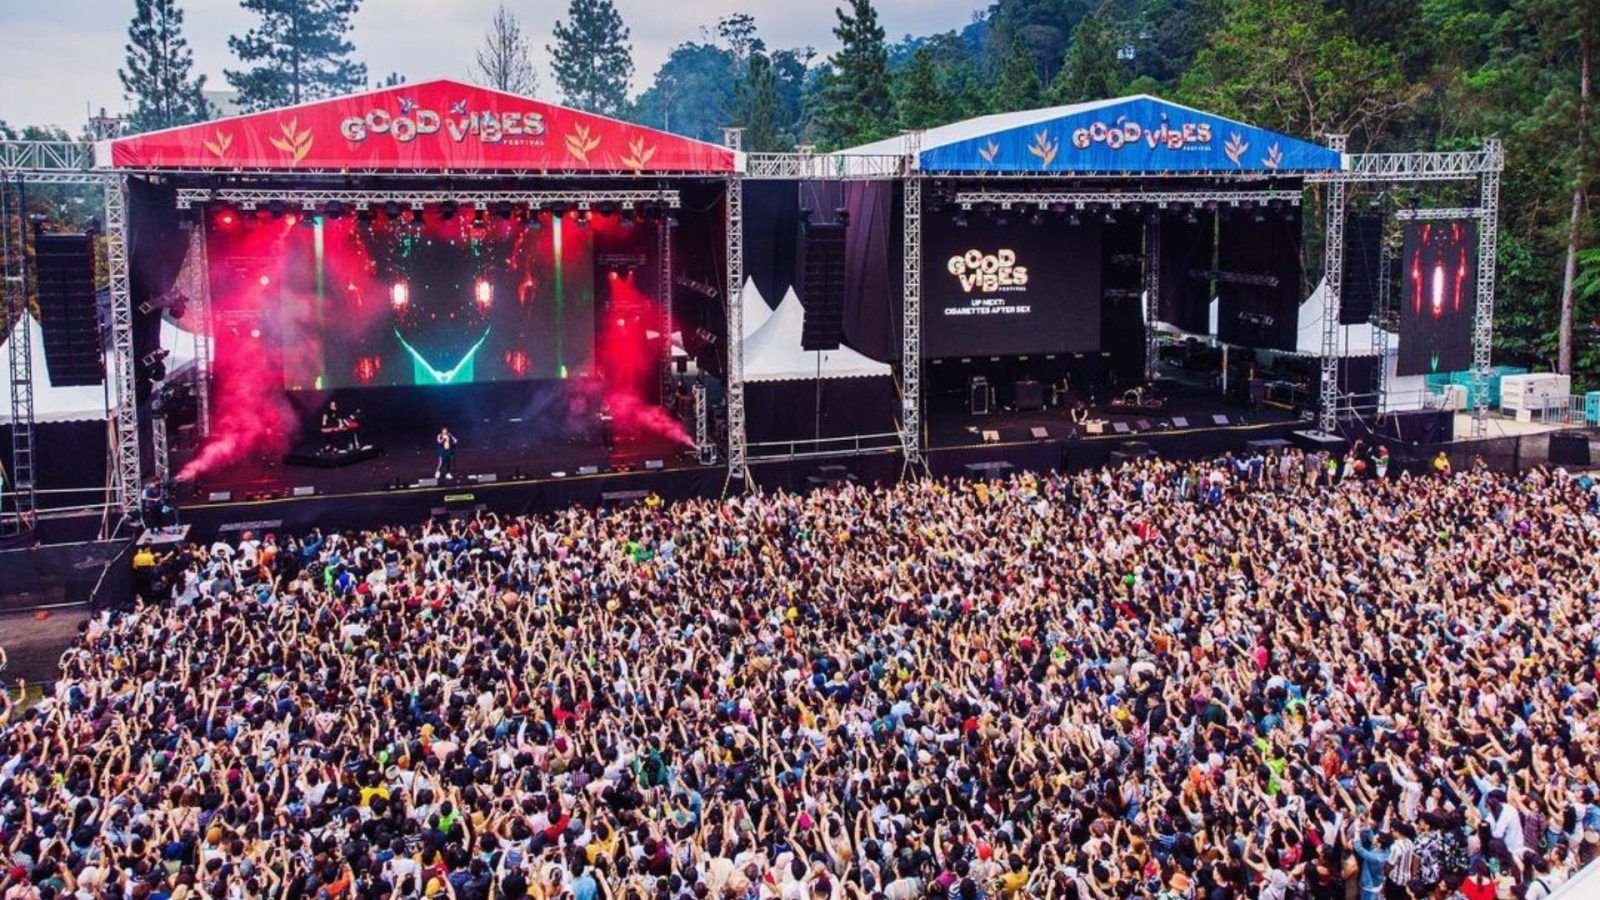 Good Vibes Festival ticket holders can apply for a refund on 14 August